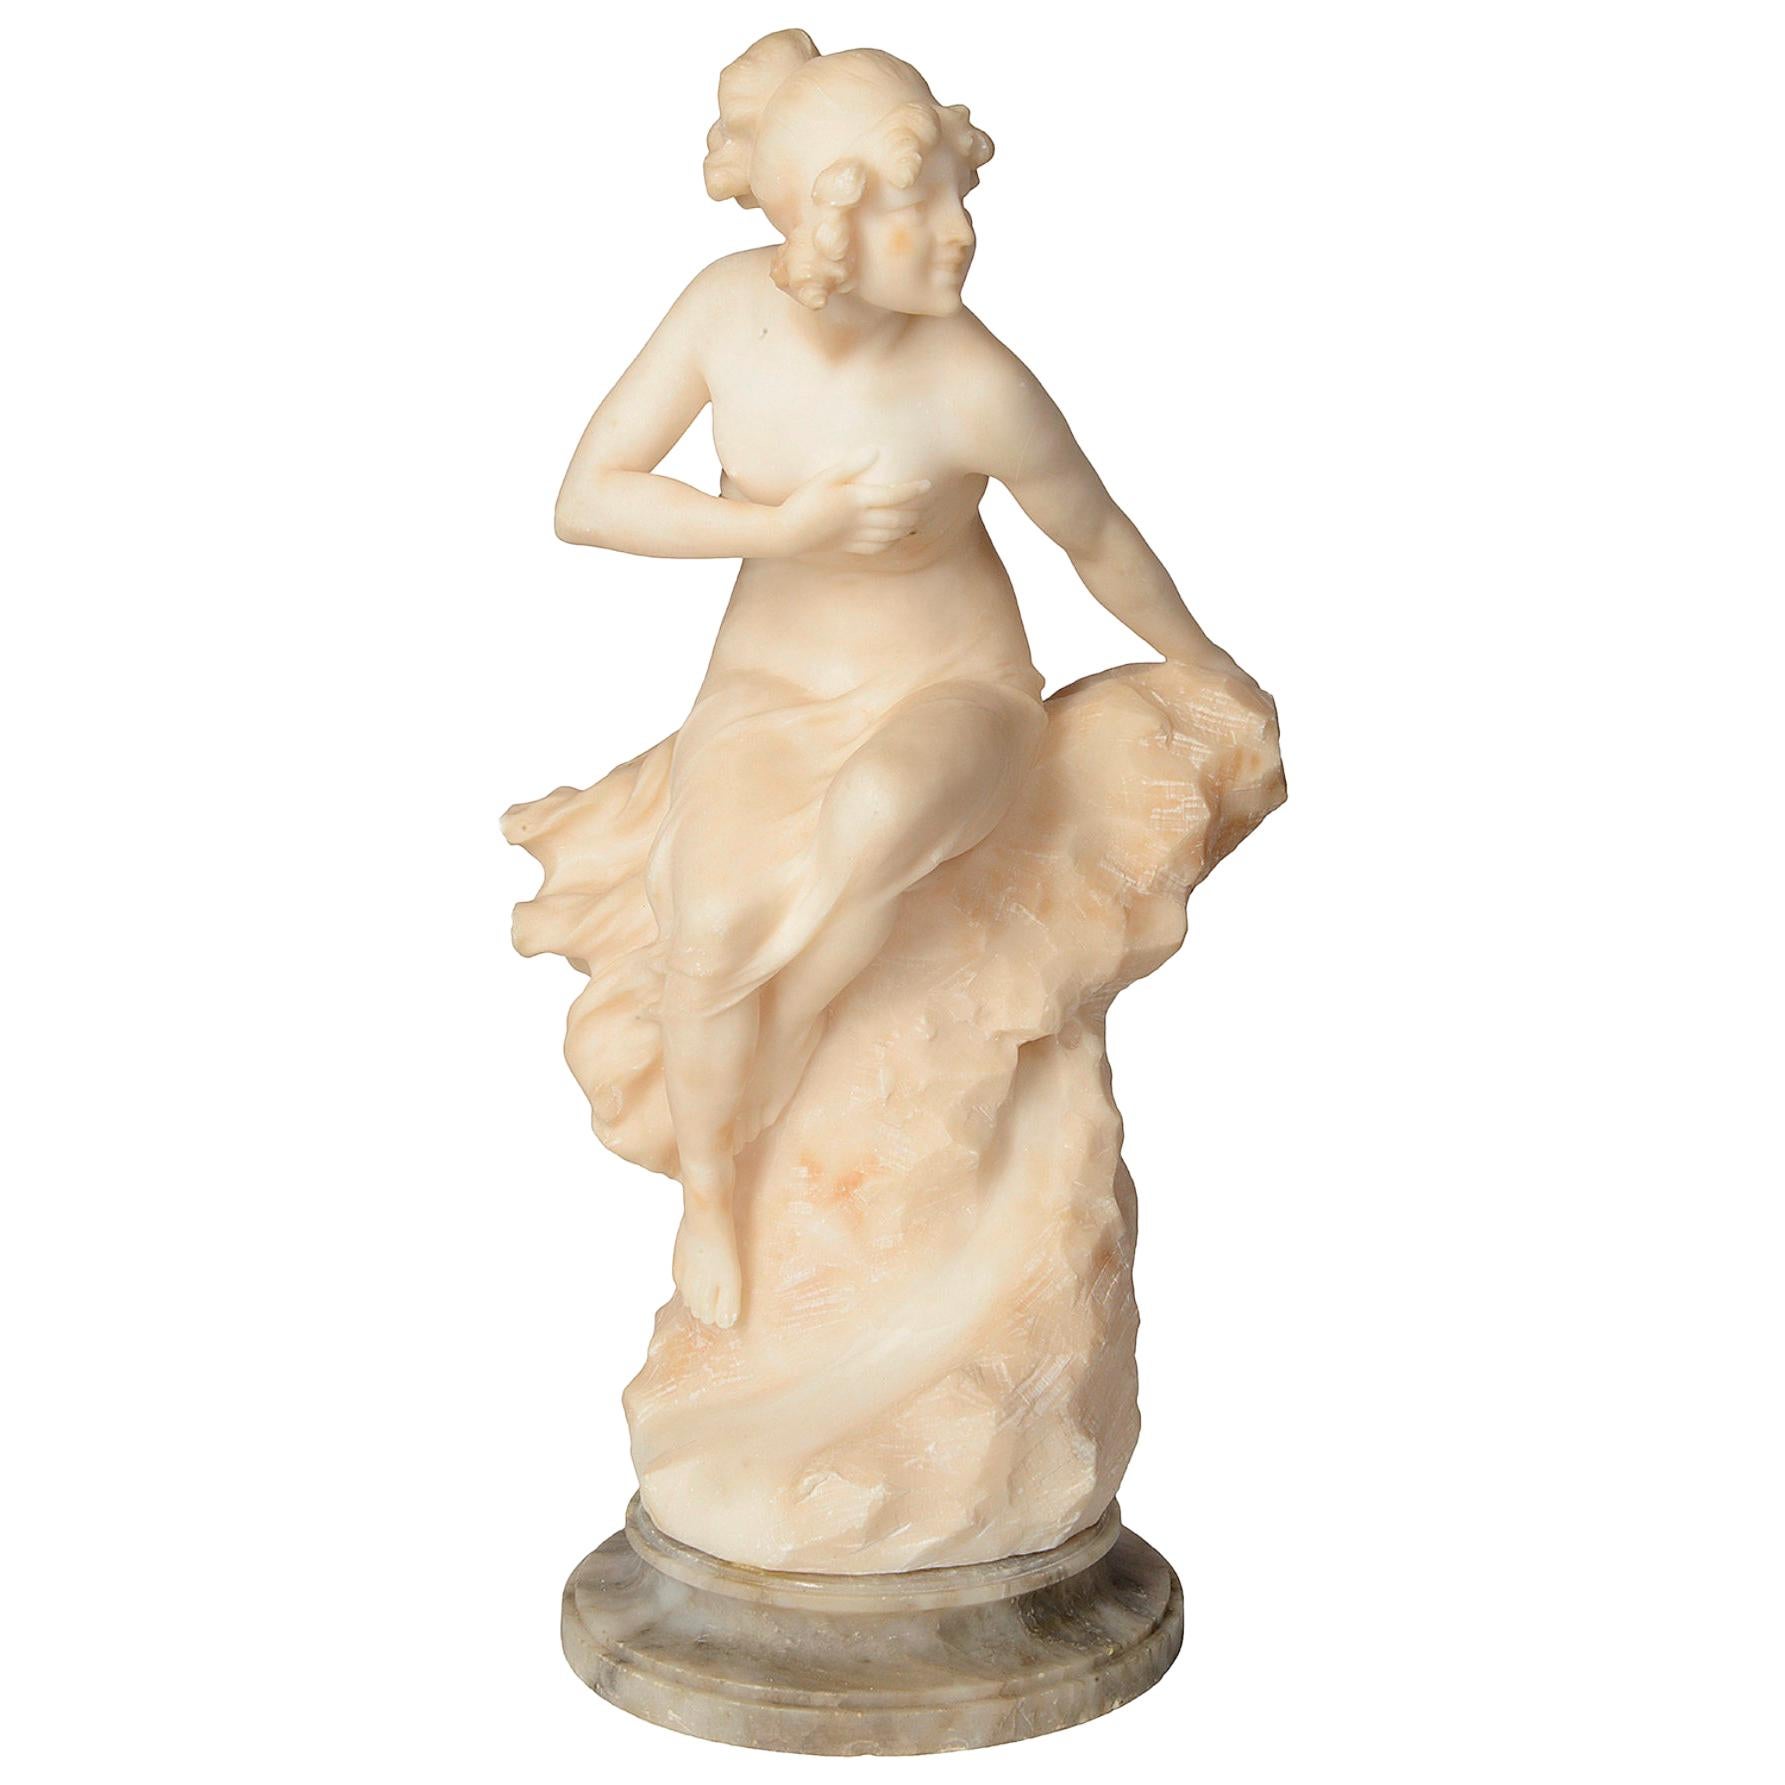 19th Century Alabaster Statue of a Young Girl Sitting on a Rock